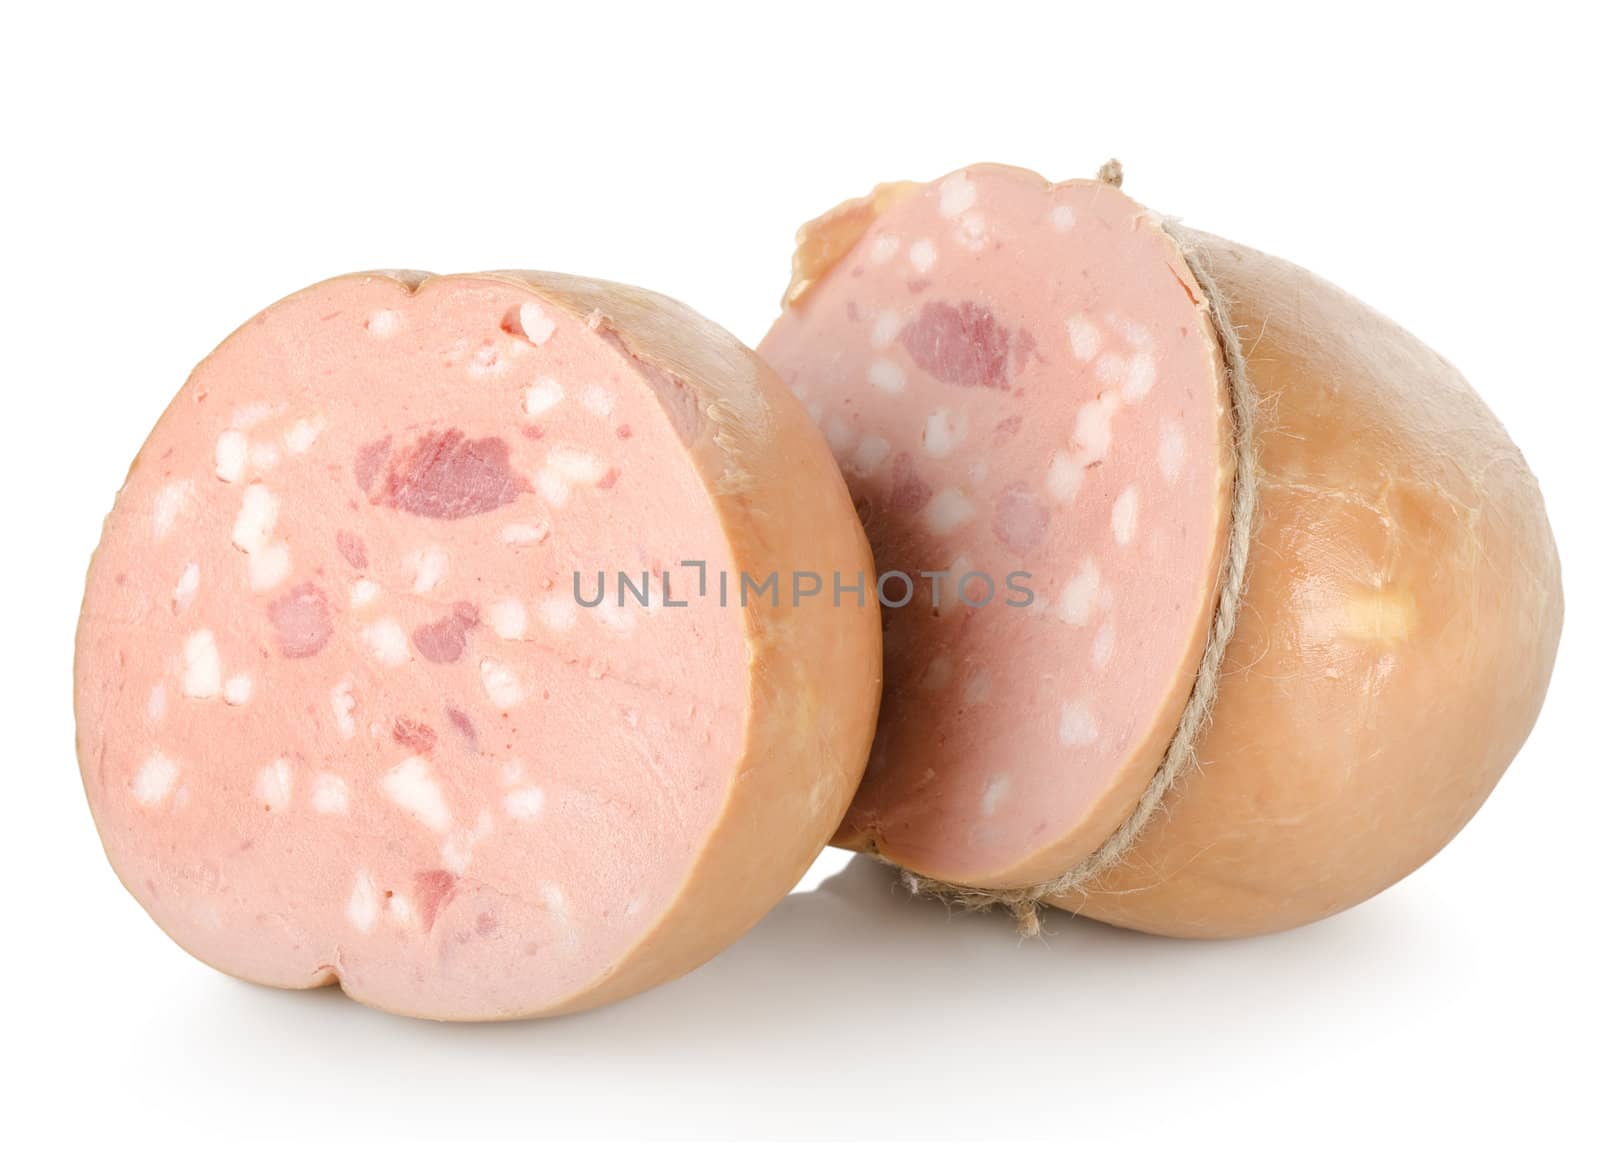 Smoked sausage isolated on a white background